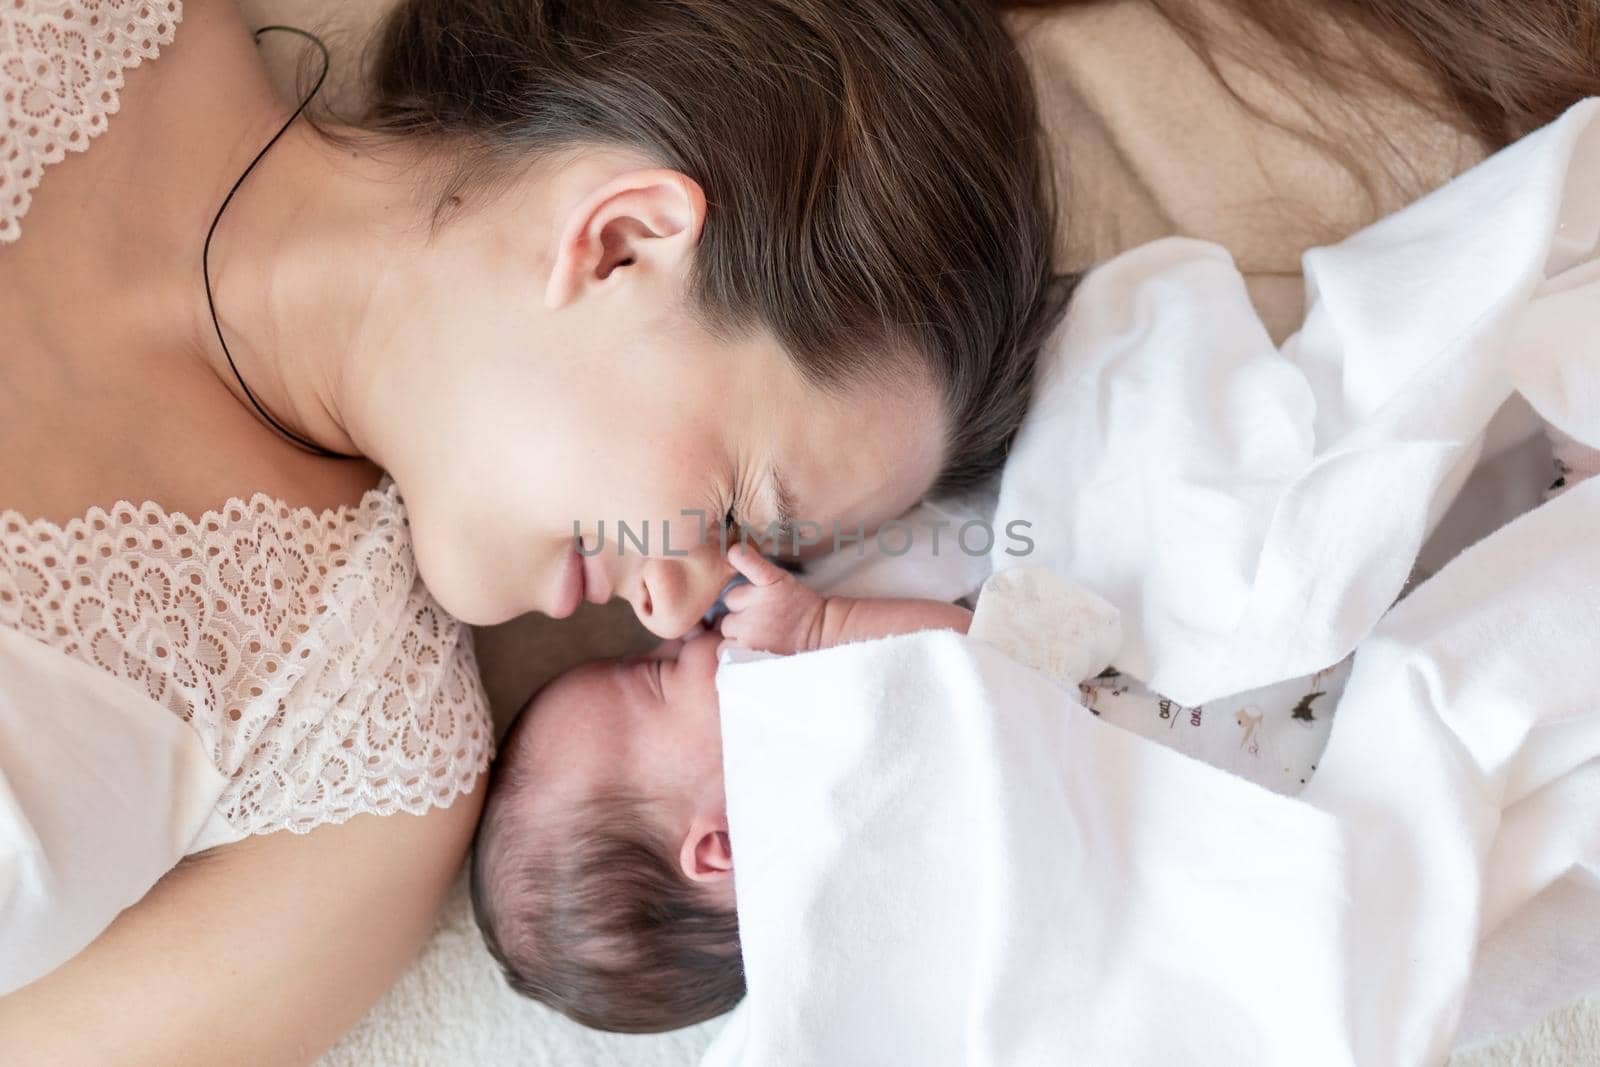 motherhood, infancy, childhood, family, care, medicine, sleep, health, maternity concept - portrait of mom with newborn baby wrapped in diaper on white background, place for text, close-up, soft focus.